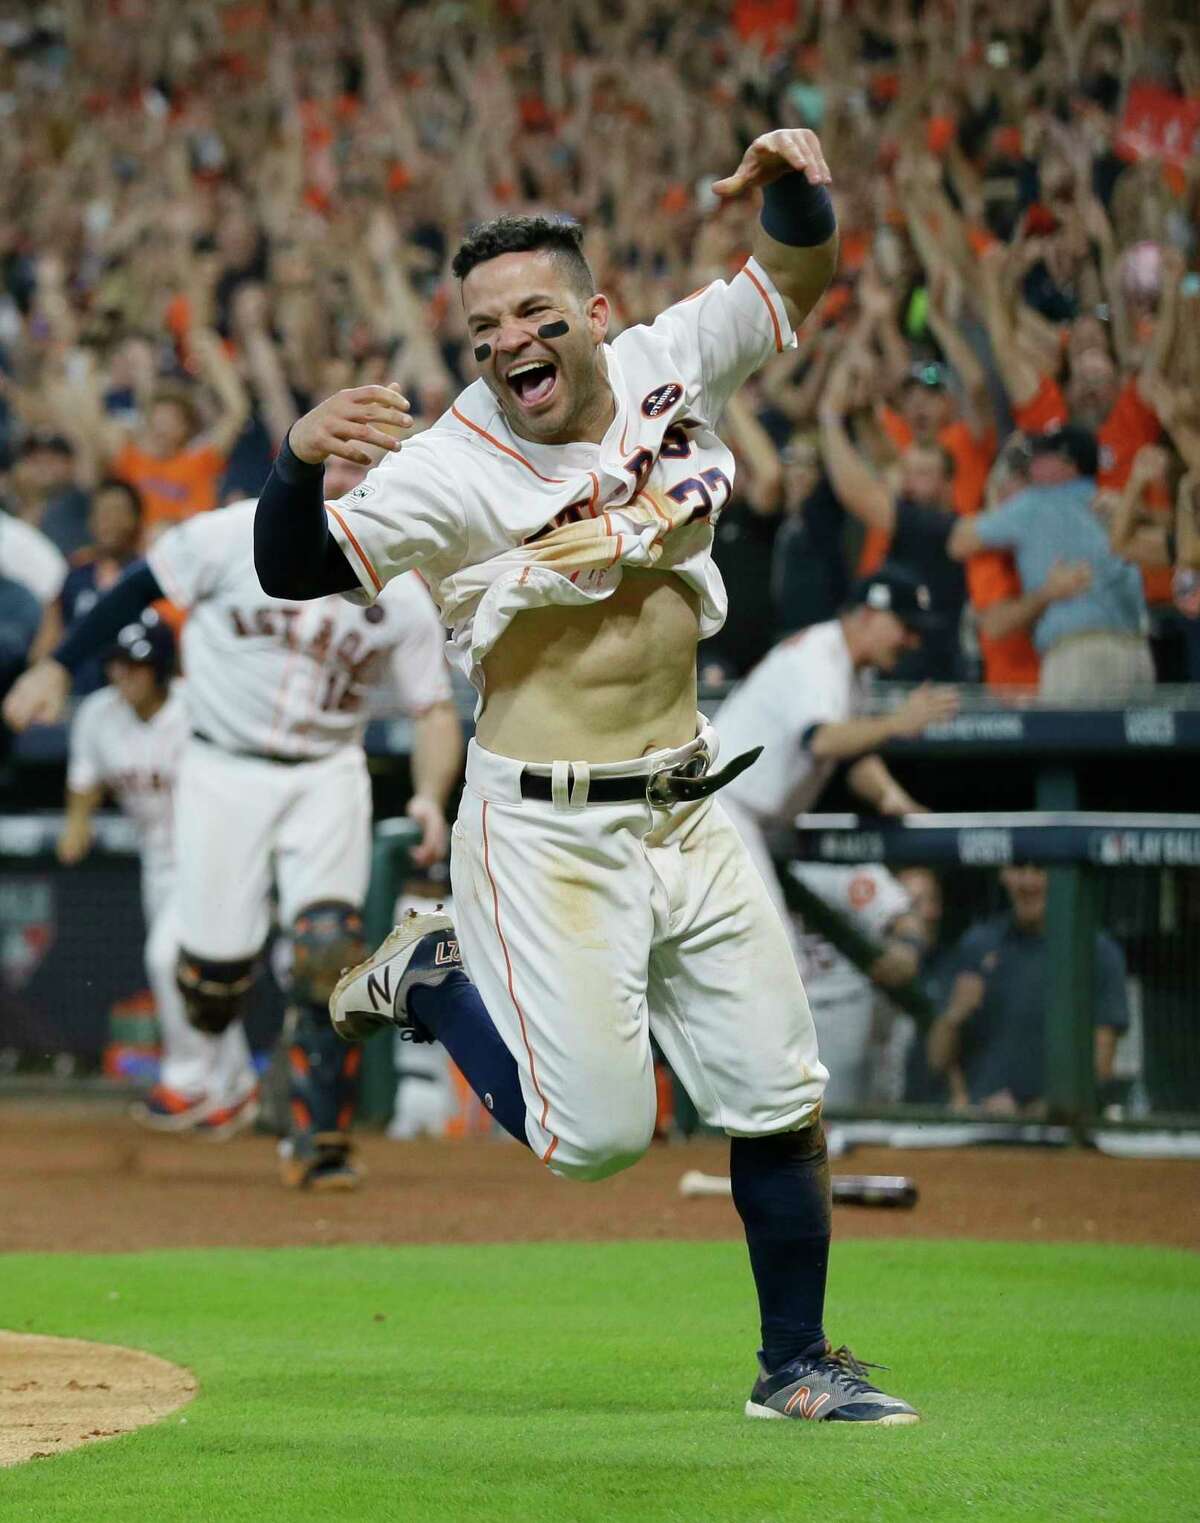 Houston Astros' Jose Altuve reacts after scoring the game-winning run during the ninth inning of Game 2 of baseball's American League Championship Series against the New York Yankees Saturday, Oct. 14, 2017, in Houston. The Astros won 2-1 to take a 2-0 lead in the series. (AP Photo/Tony Gutierrez)